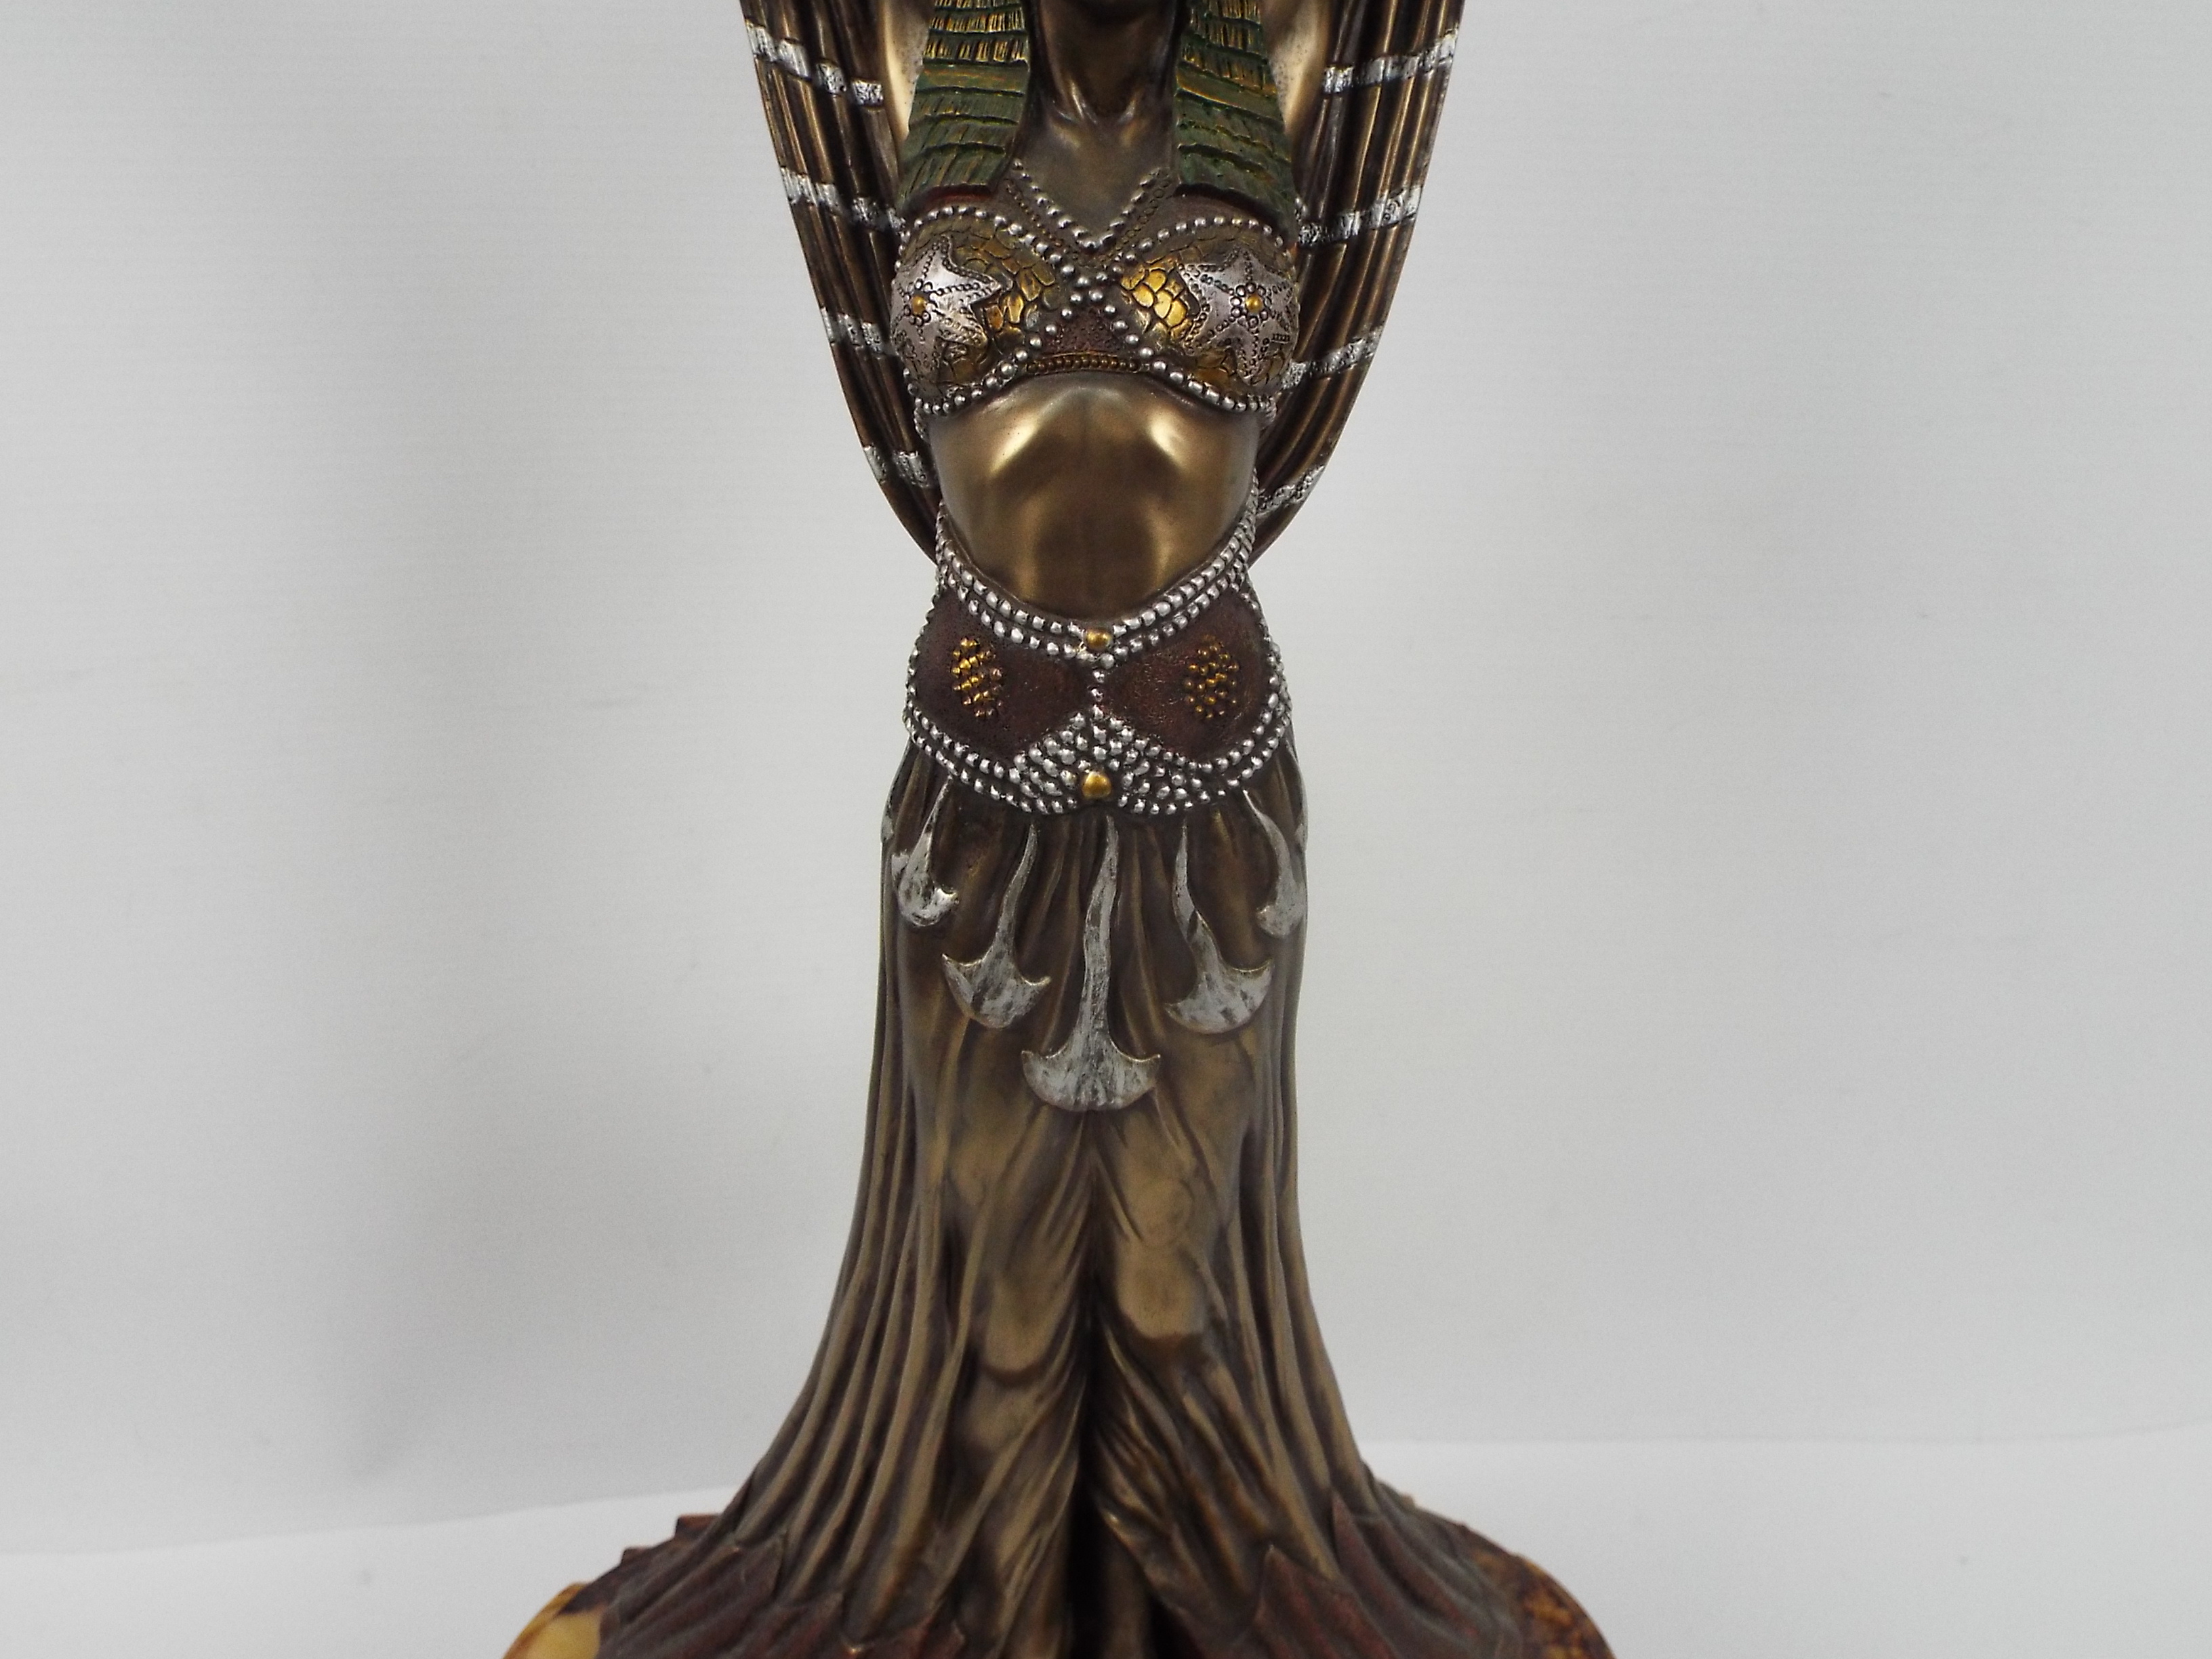 A large Art Deco style figure depicting an Egyptian style female with arms raised, - Image 3 of 6